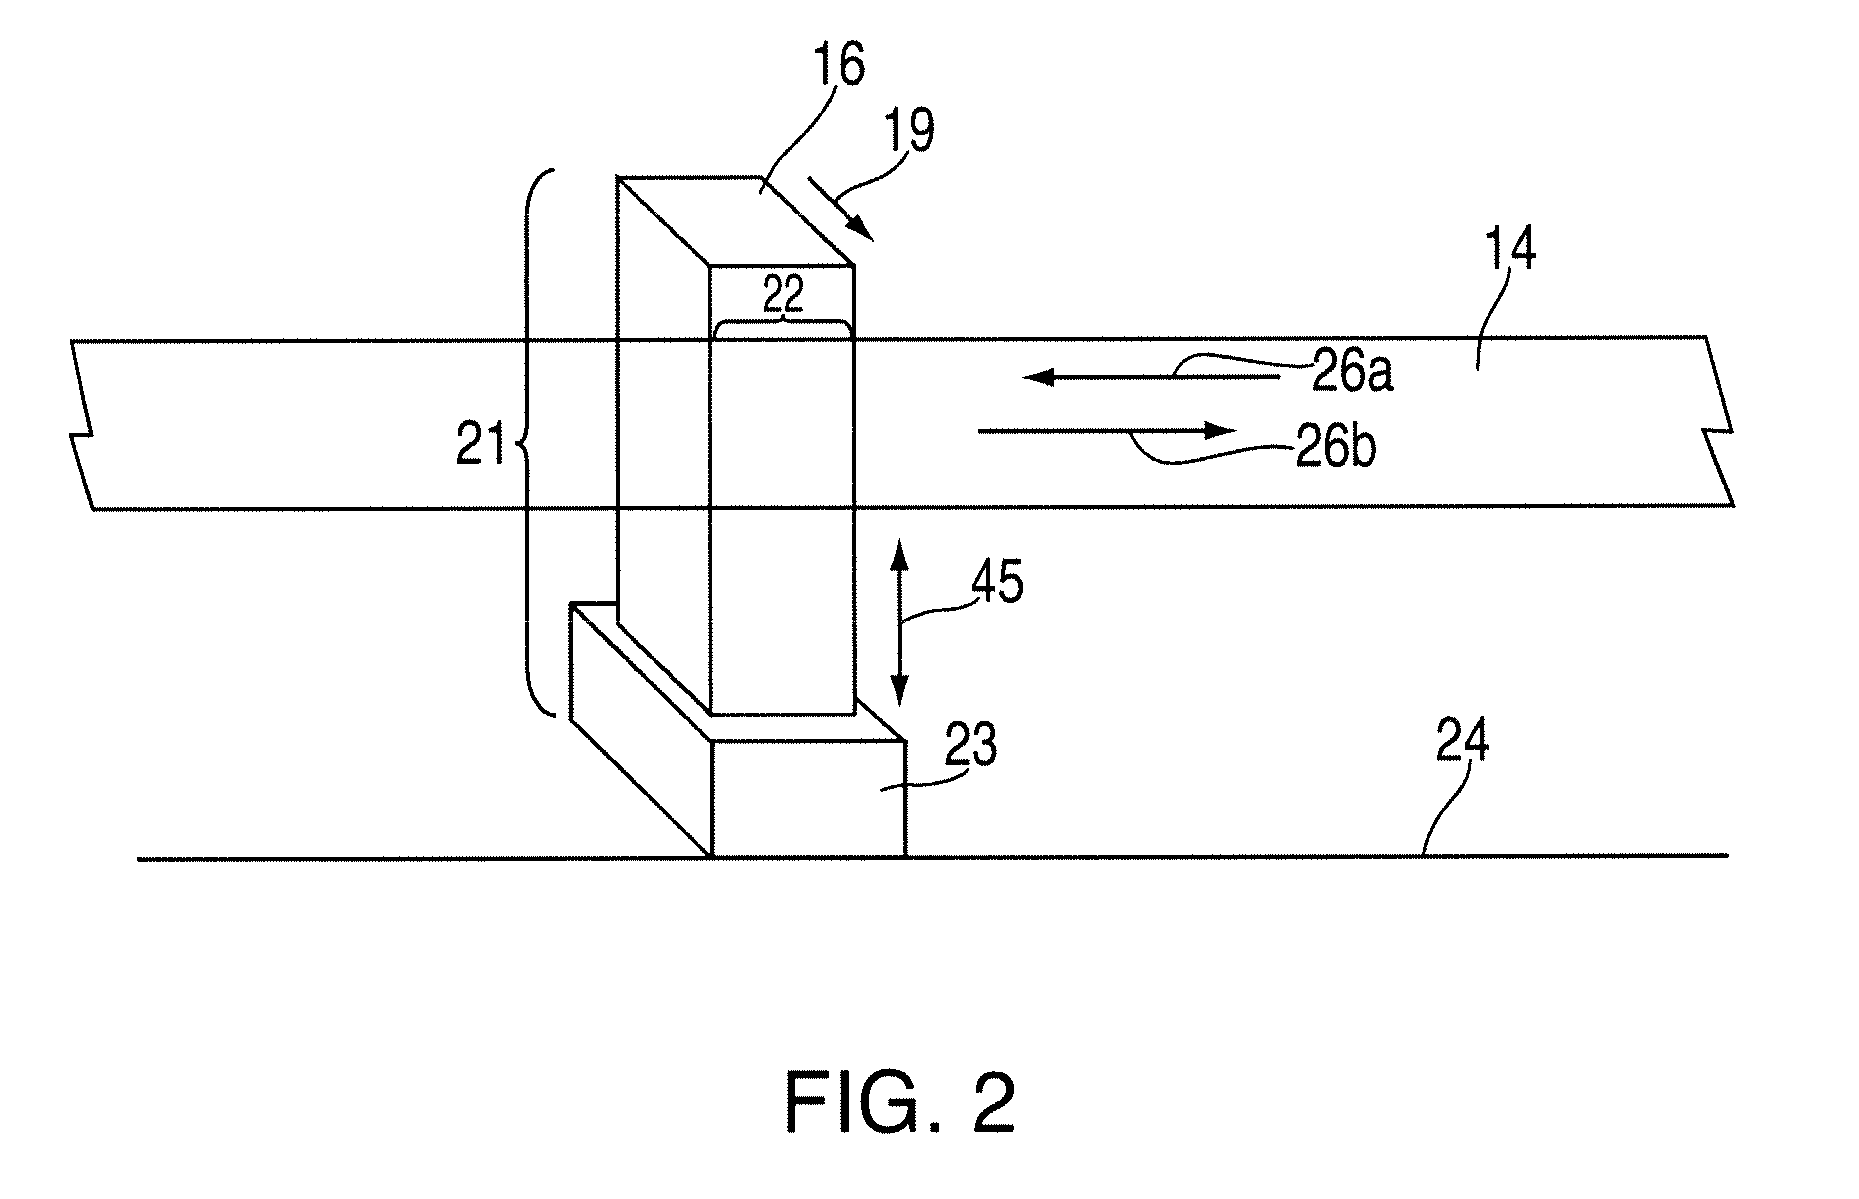 Method for reducing occurrences of tape stick conditions in magnetic tape